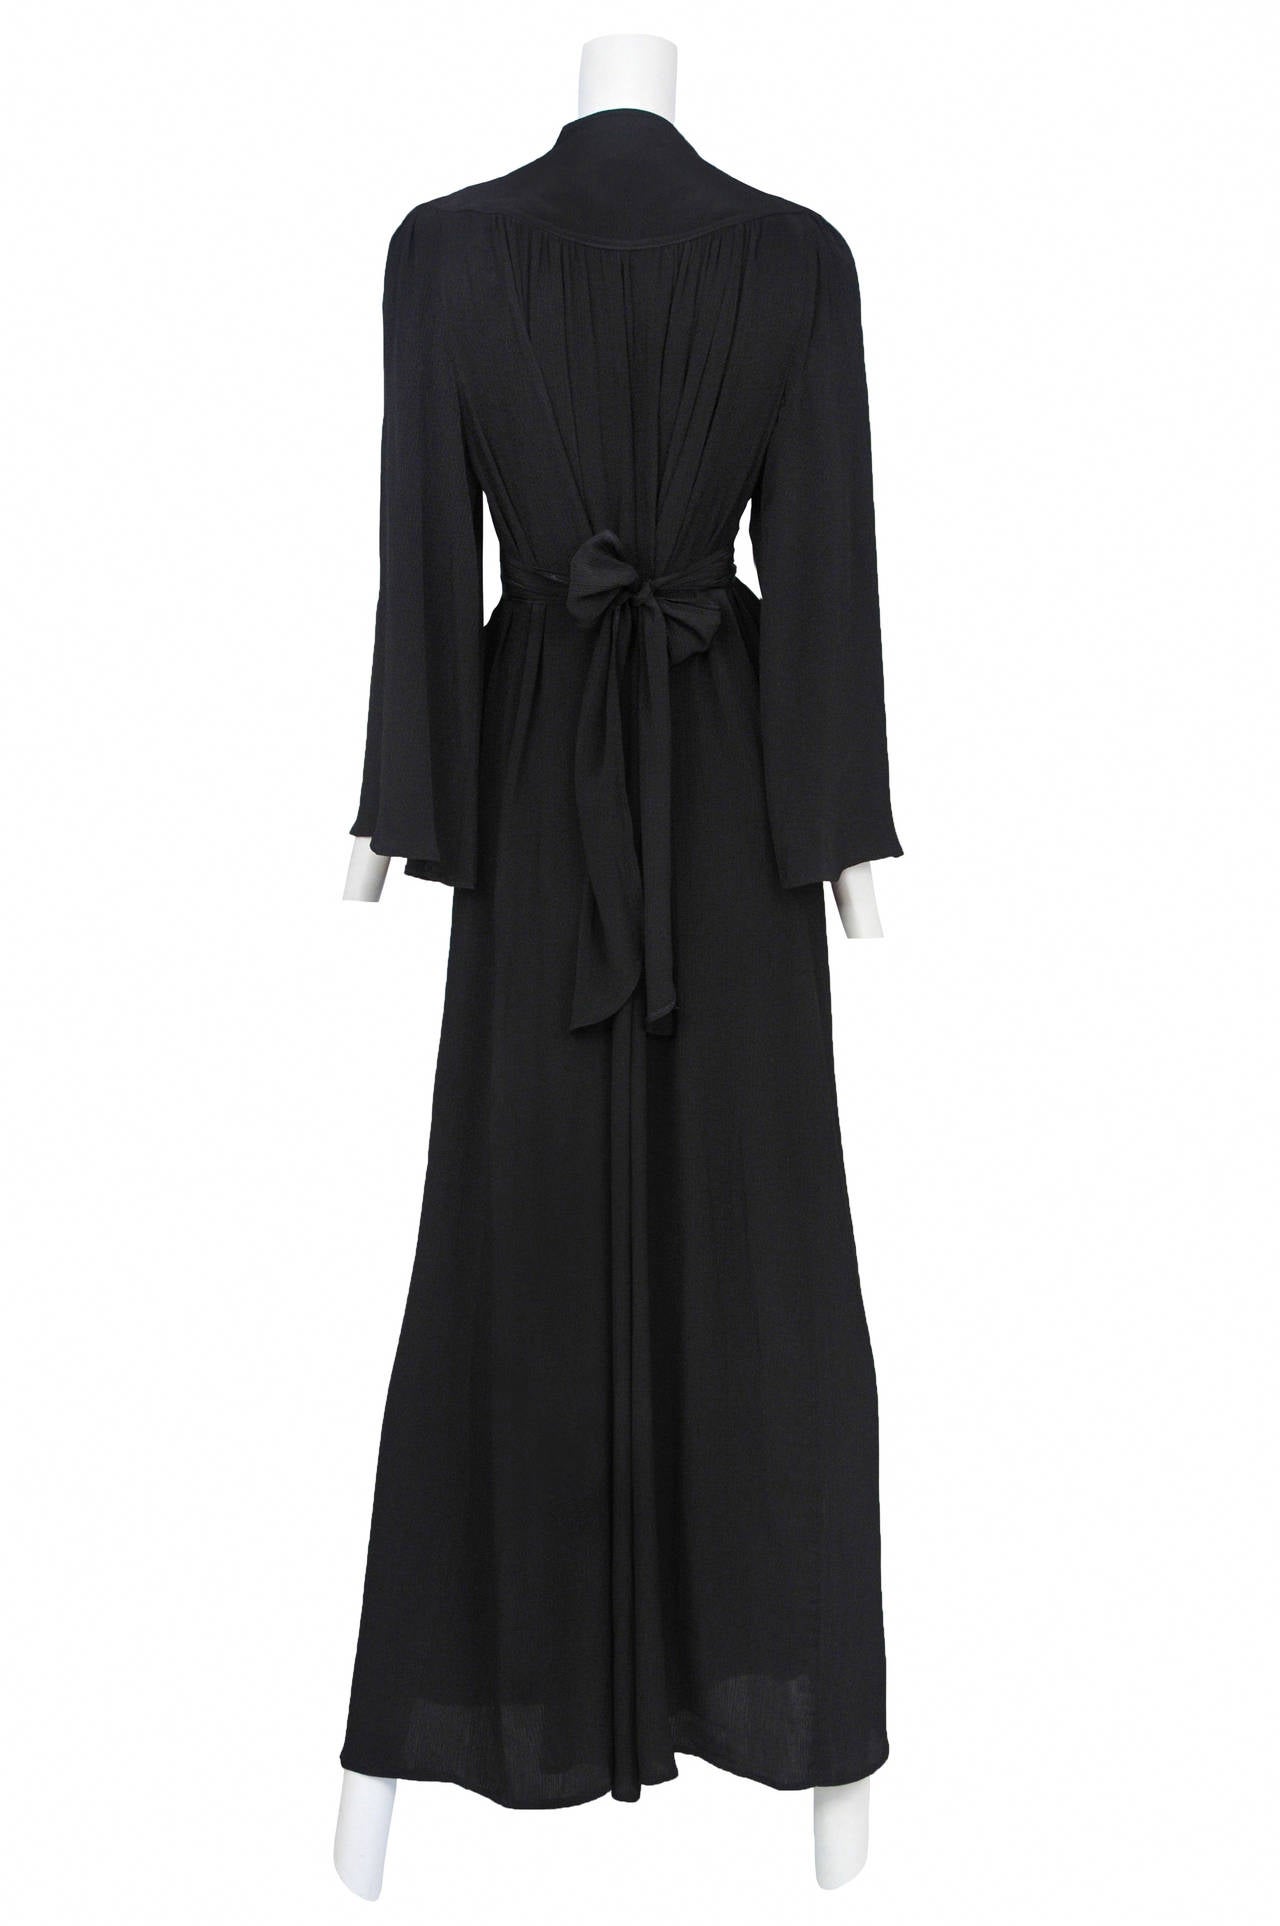 Vintage Ossie Clark black crepe Graduation Gown featuring long sleeves and built in tie at the waist. 

Measurements: Free in size. Bust and waist are 50